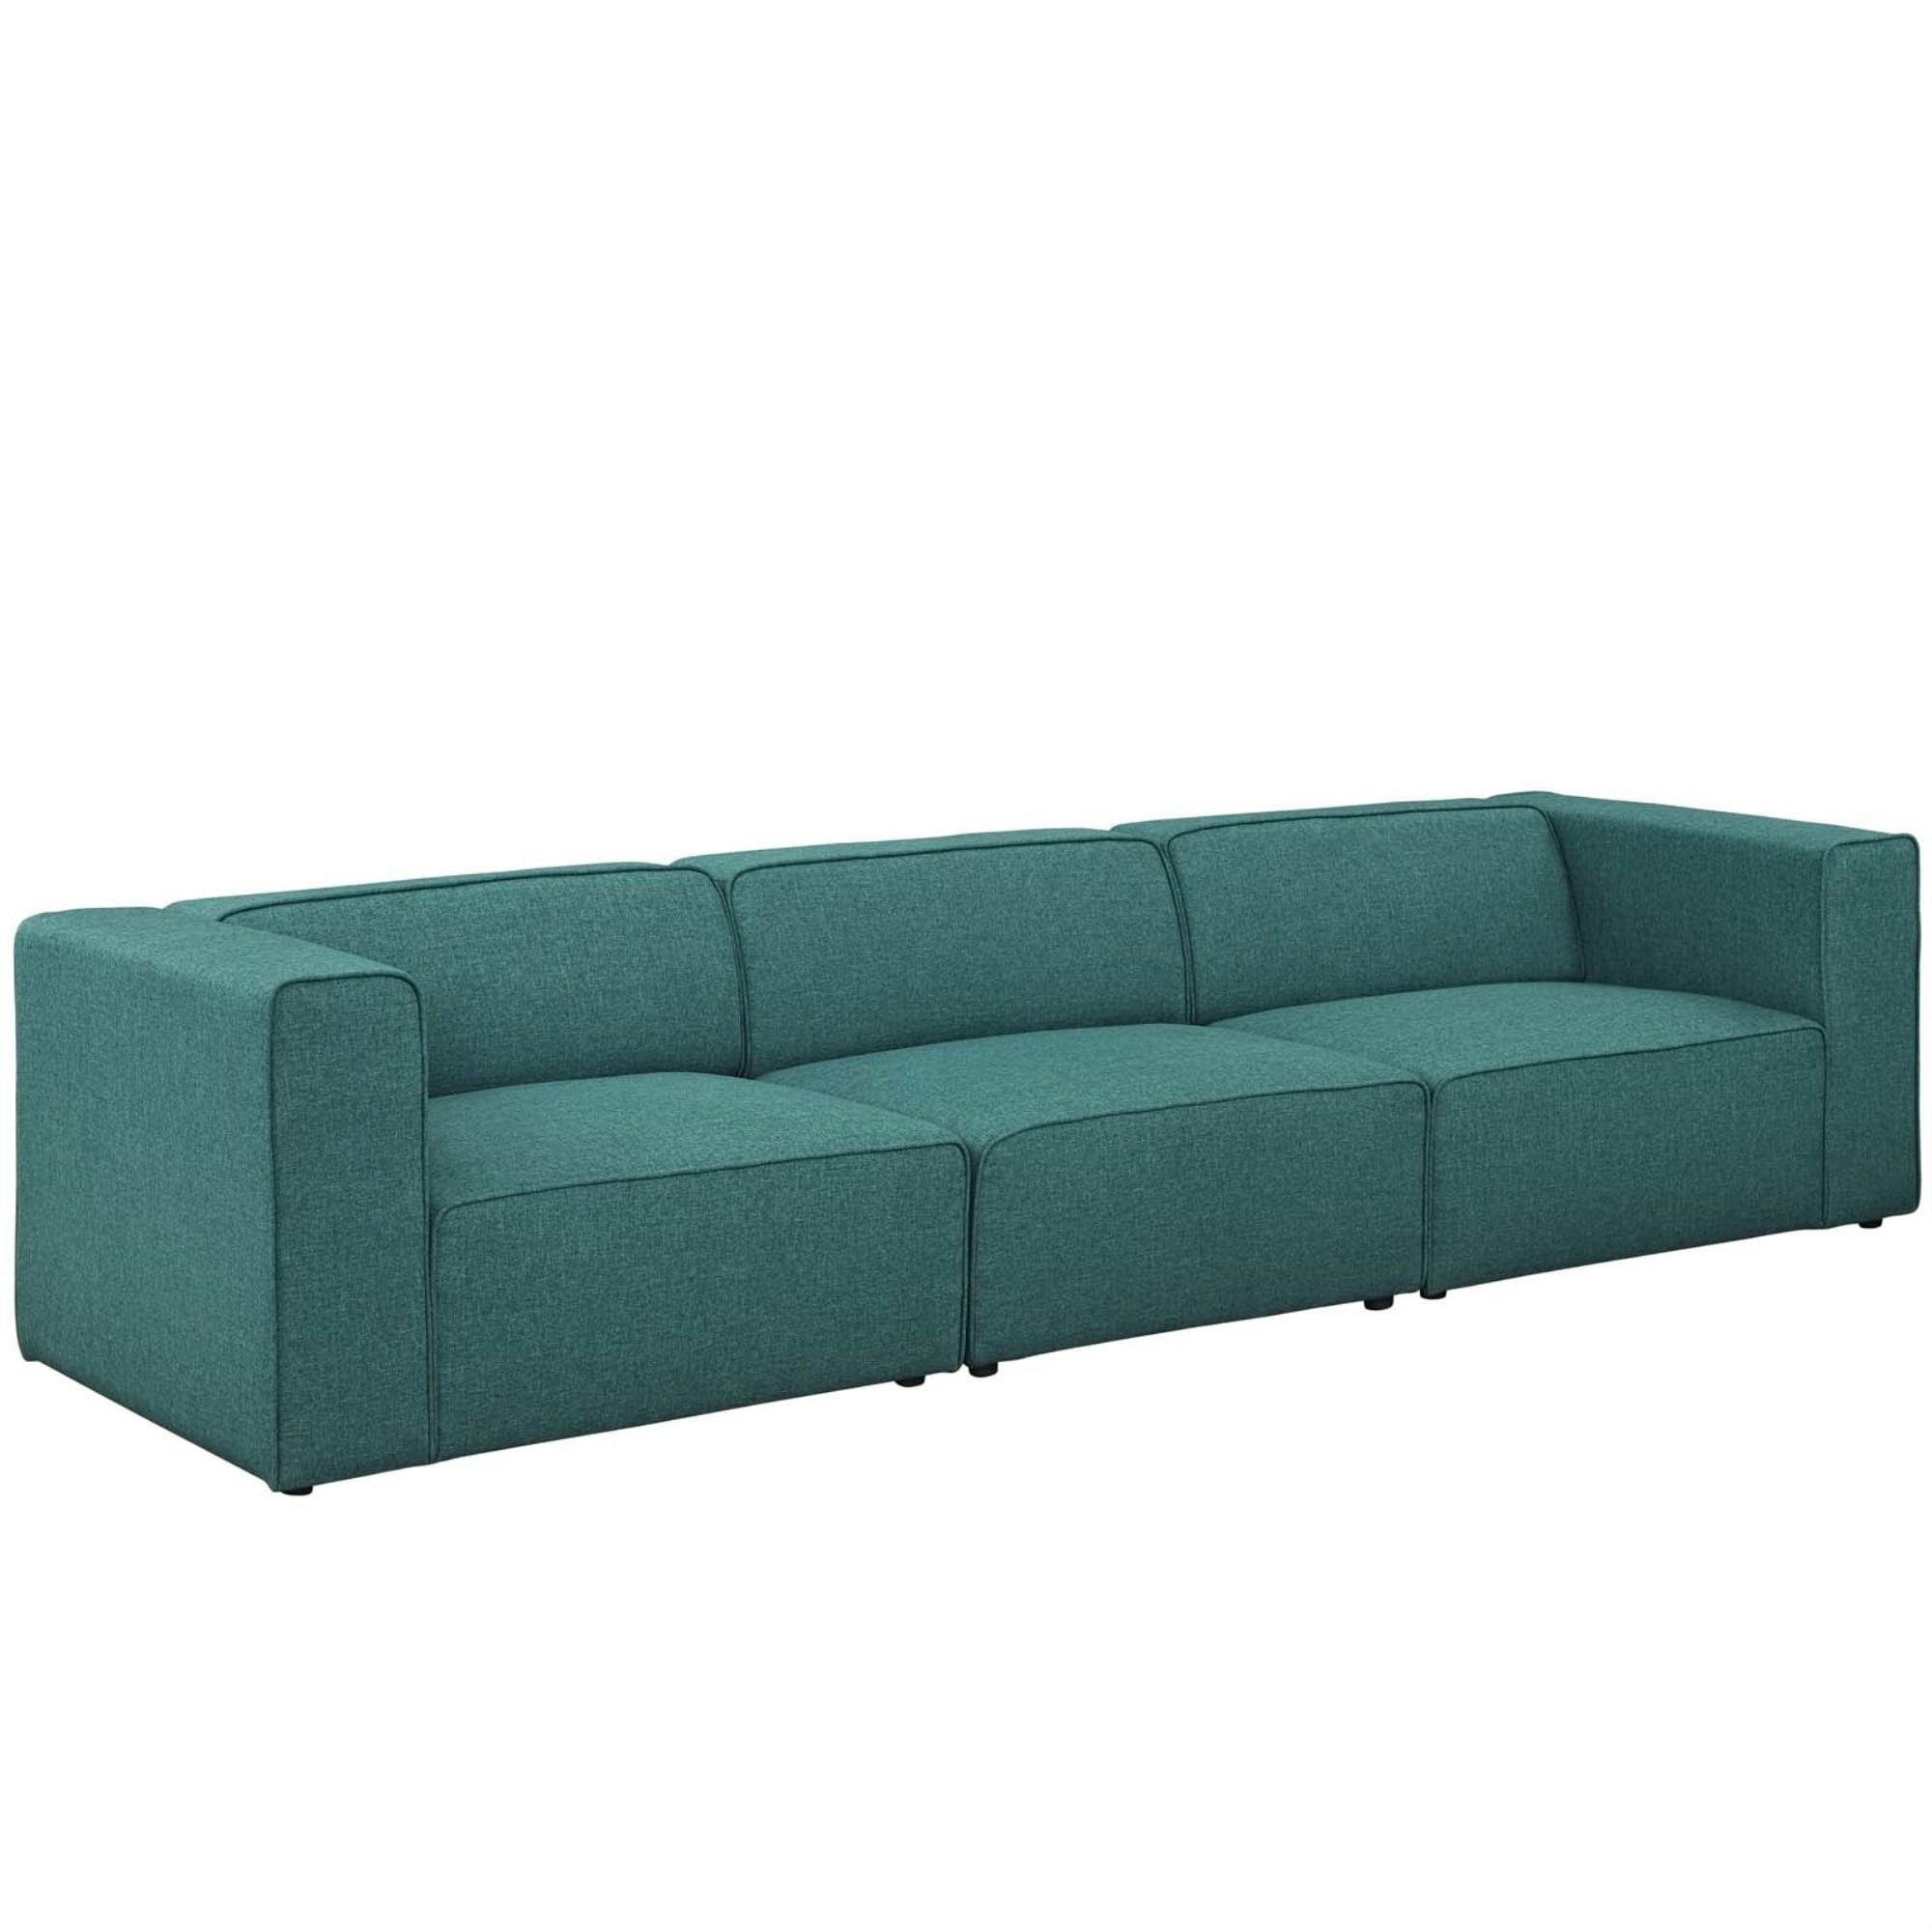 Expansive Teal Fabric 3-Piece Sectional Sofa Set with Elegant Piping